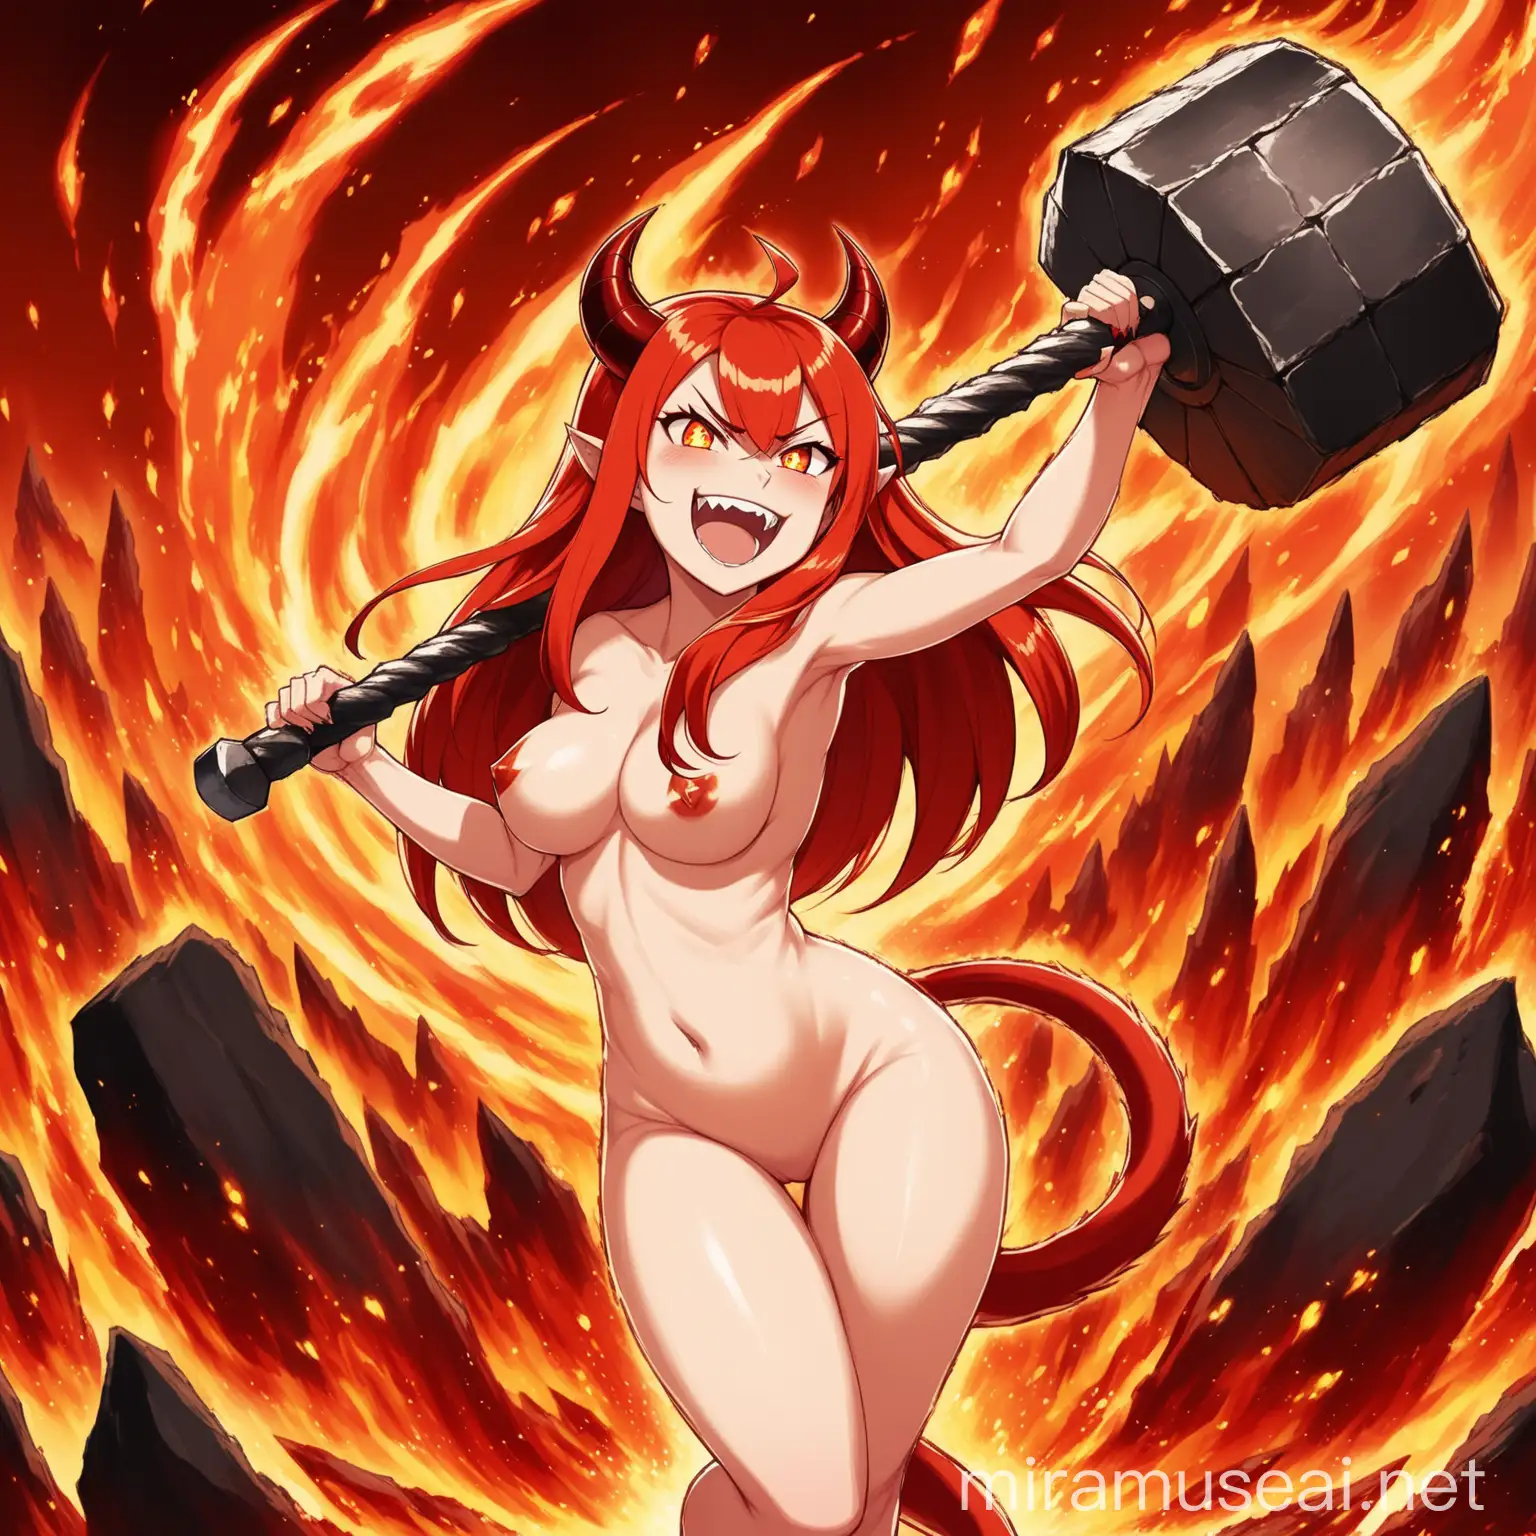 Fiery Anime SheDevil Dancing with Giant Blacksmith Hammer